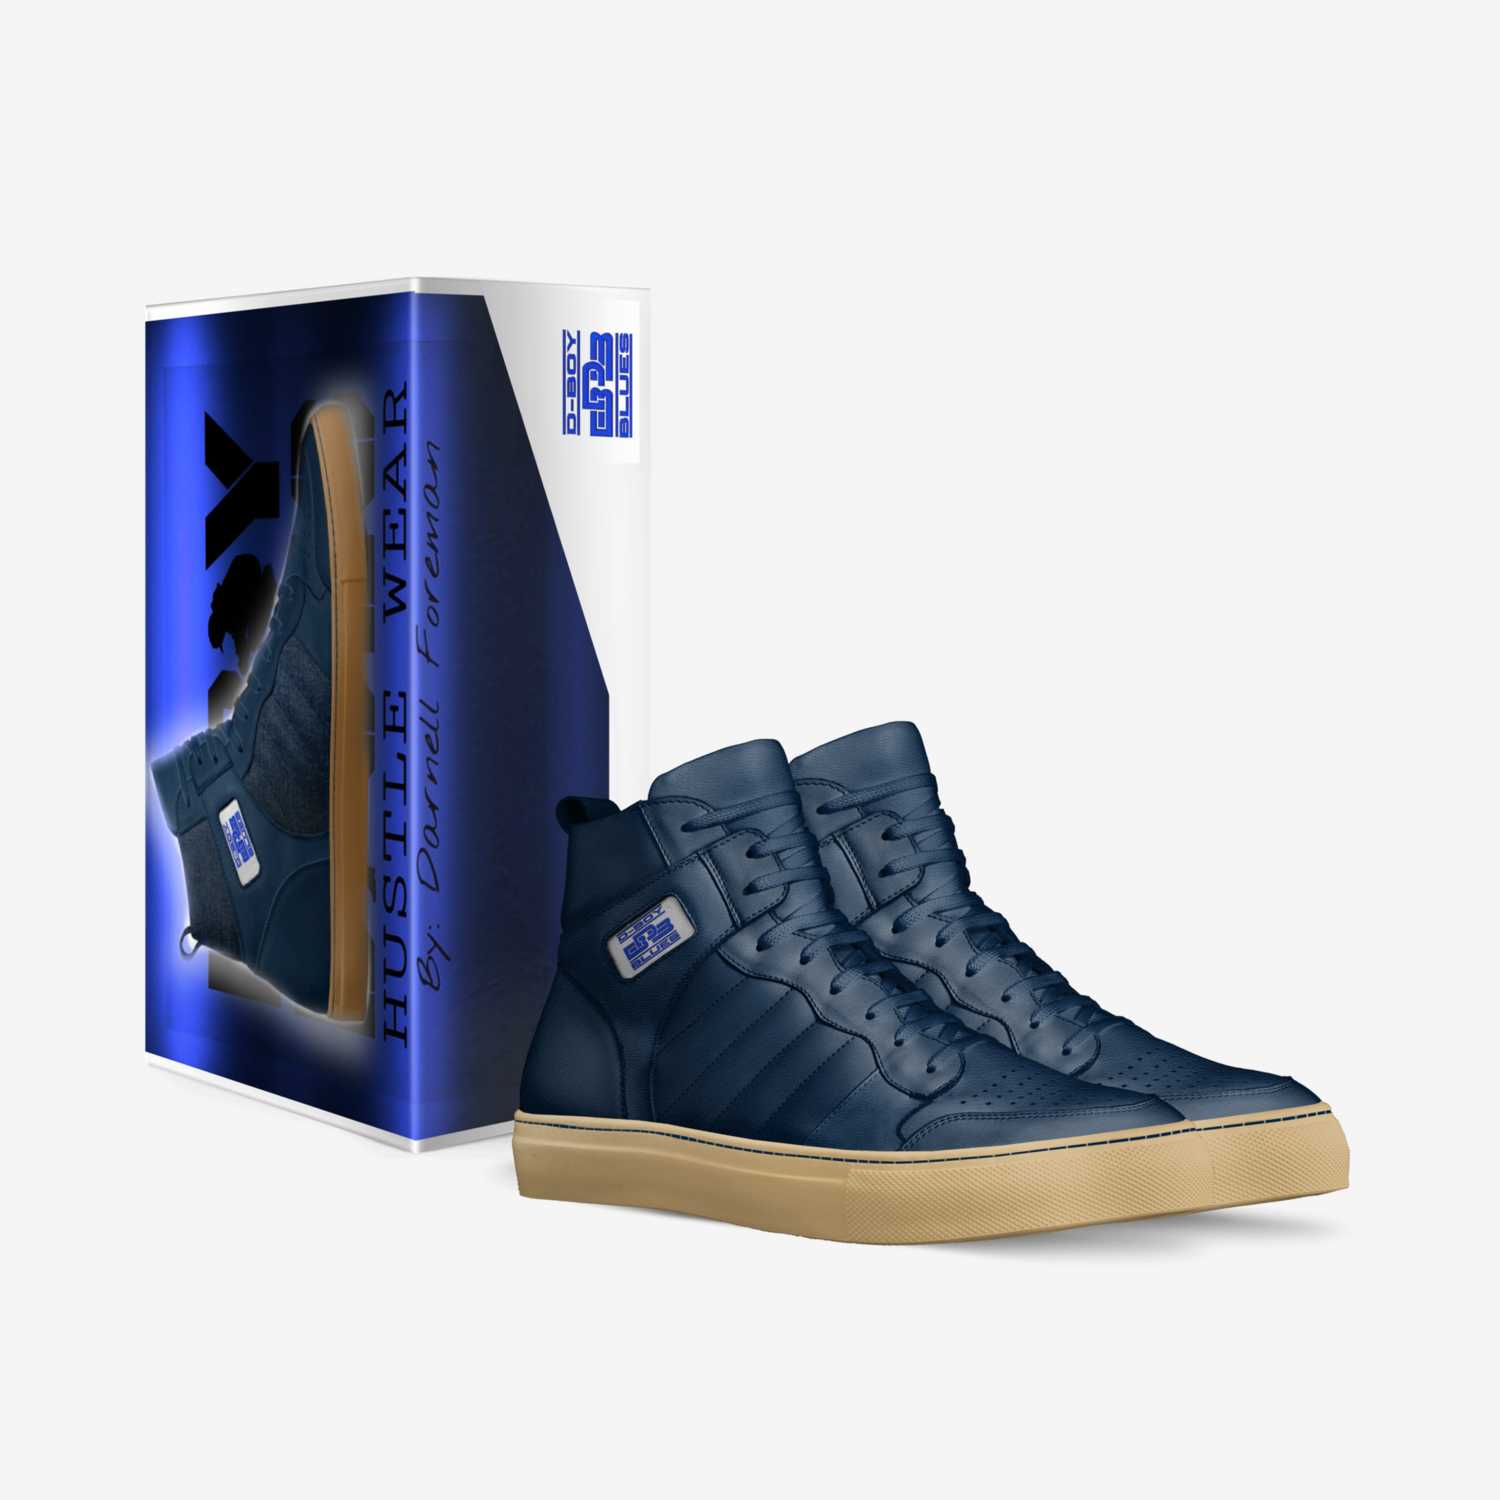 BLUEBERRY GUM DROP custom made in Italy shoes by Darnell Foreman | Box view